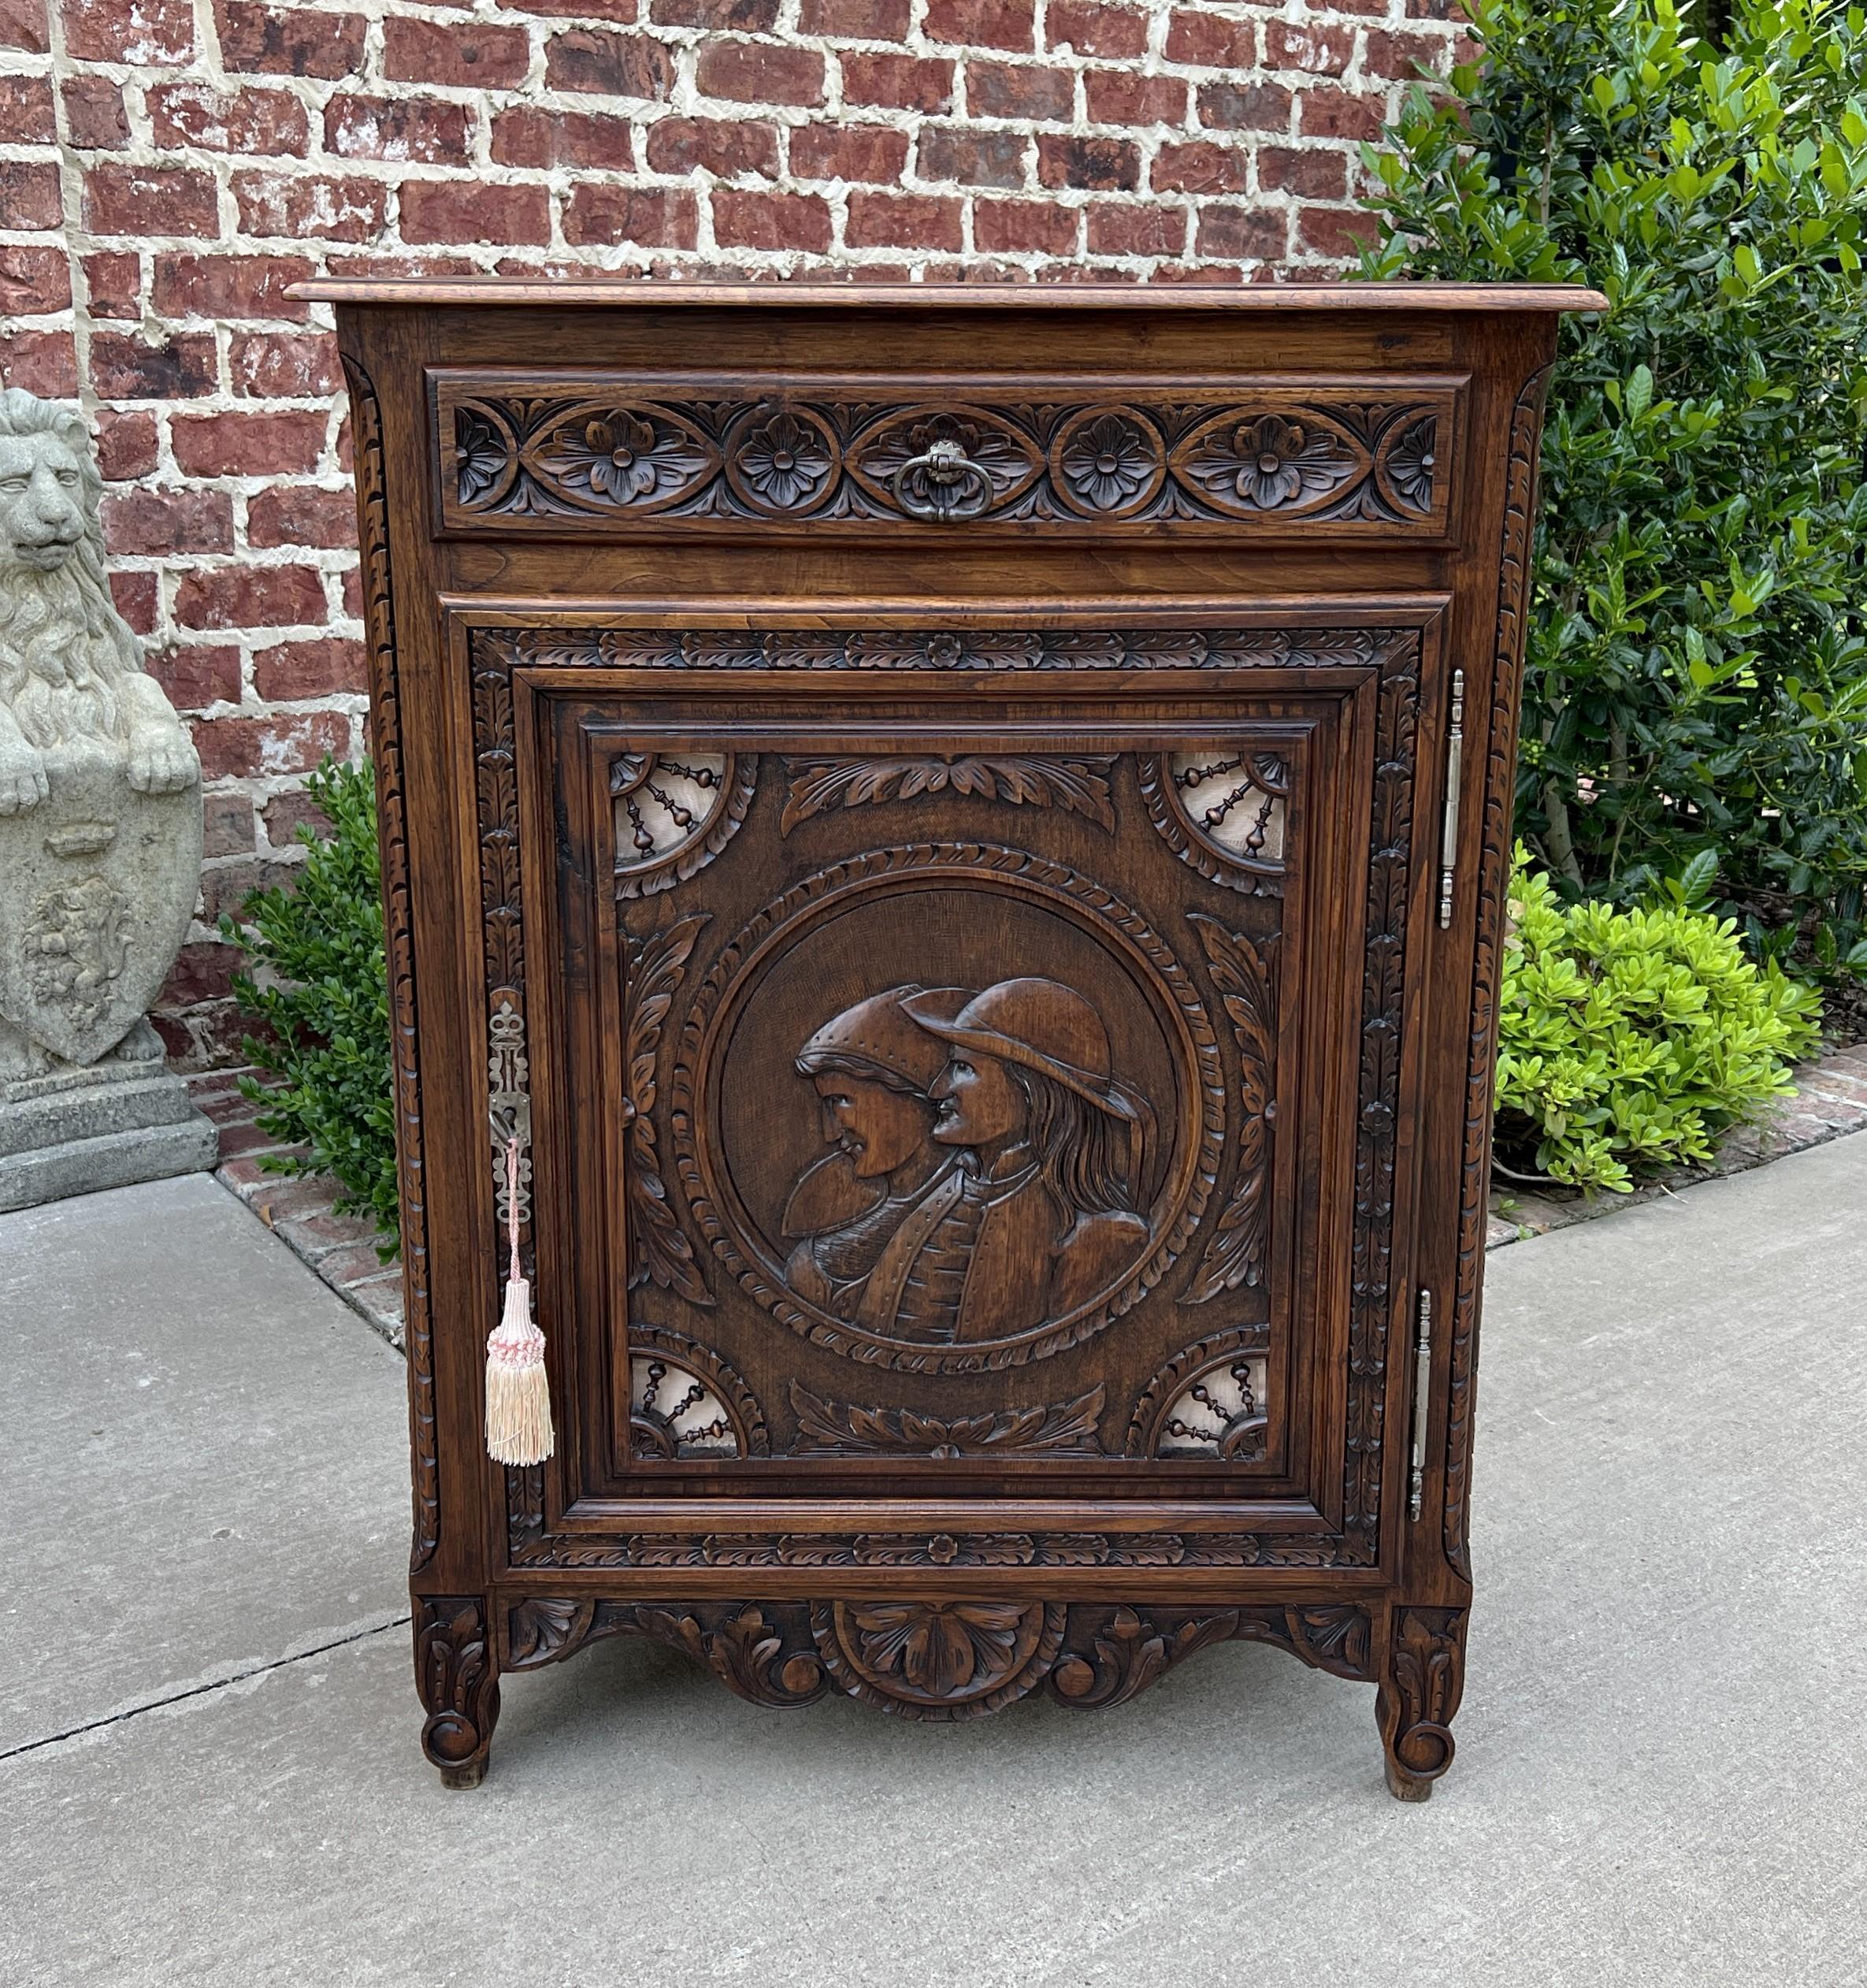 Beautifully Carved Antique French Oak Breton Jam Cabinet with Drawer~~c. 1890s 

 Highly requested classic French Breton design~~Breton (sometimes known as Brittany) furniture originated in late 19th century France in a region to the west of